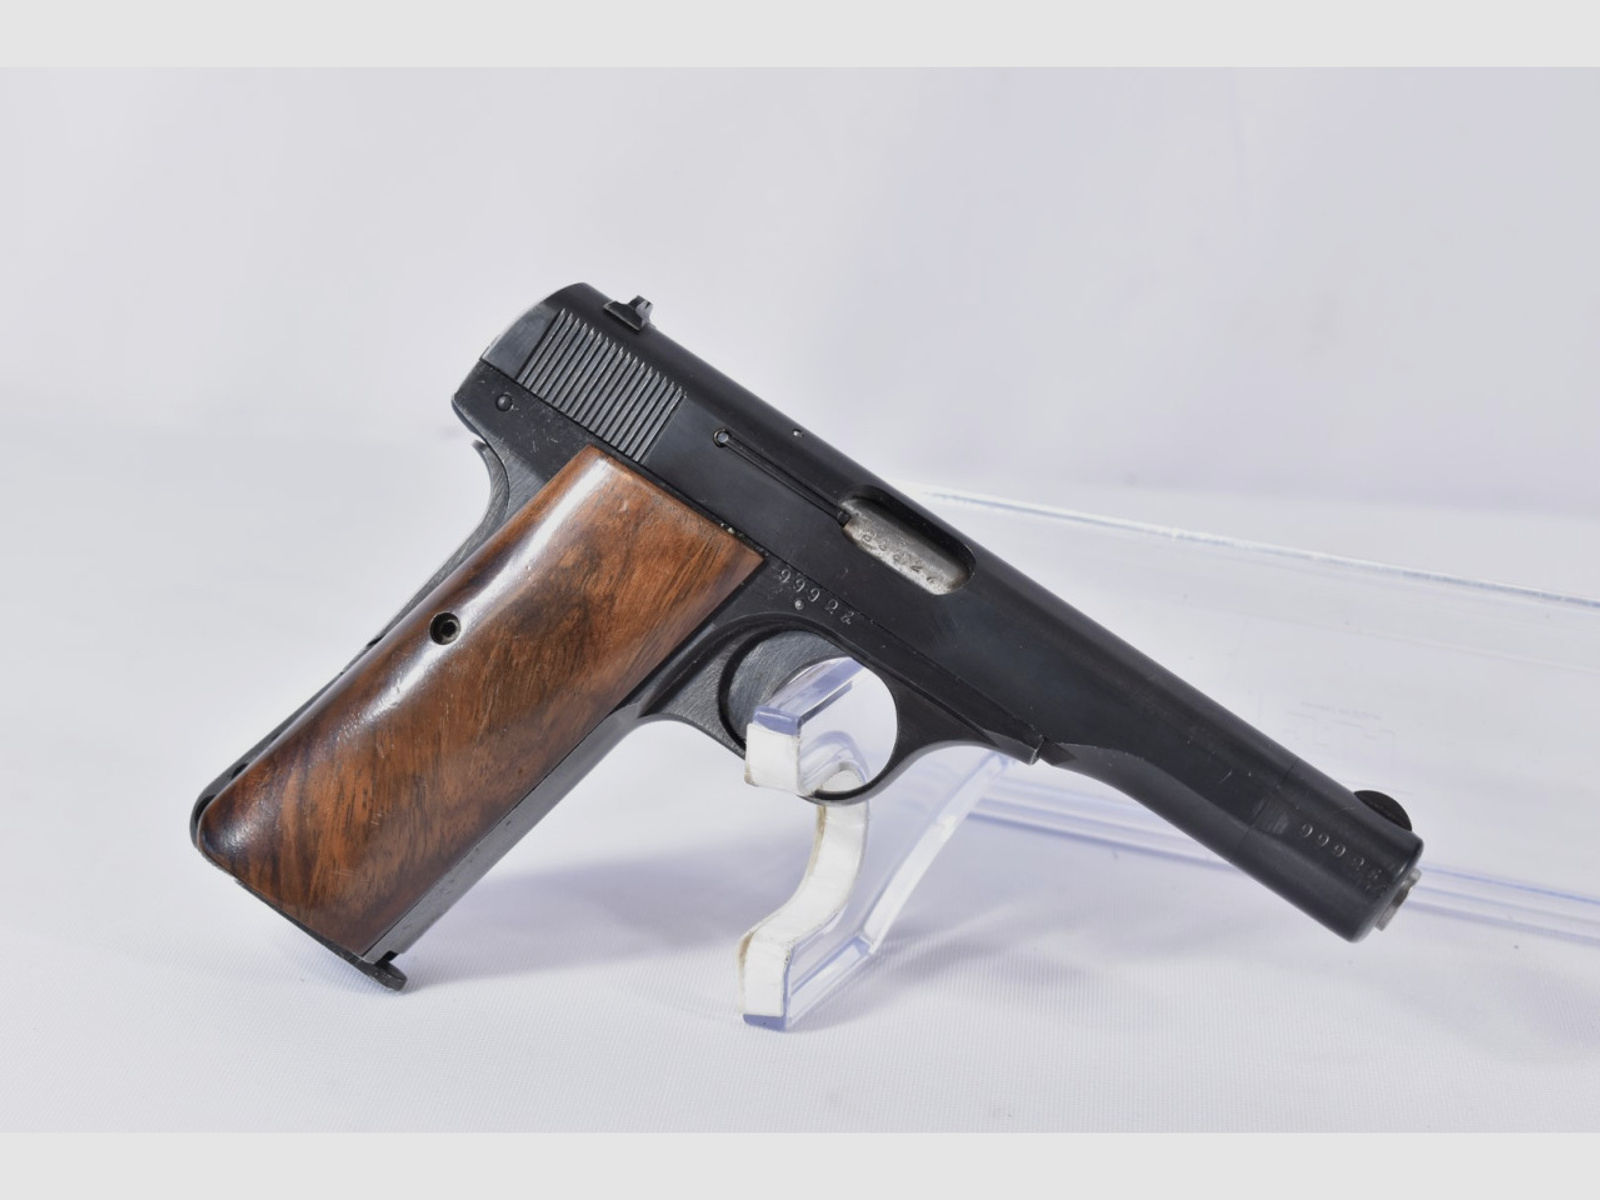 FN ohne 7,65mmBrowning Pistole